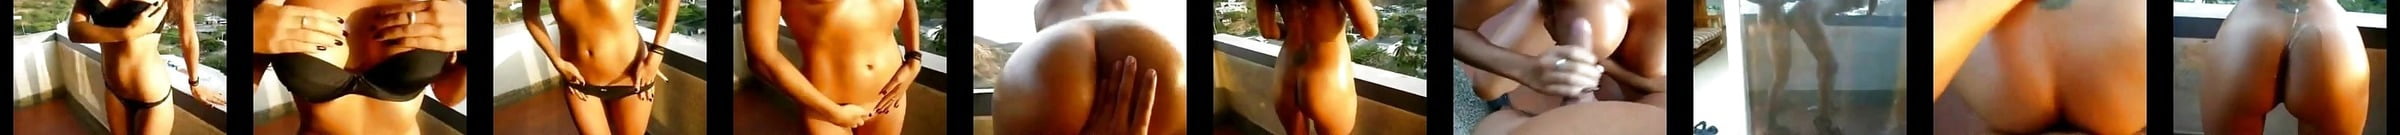 Featured Balcony Porn Videos 6 Xhamster